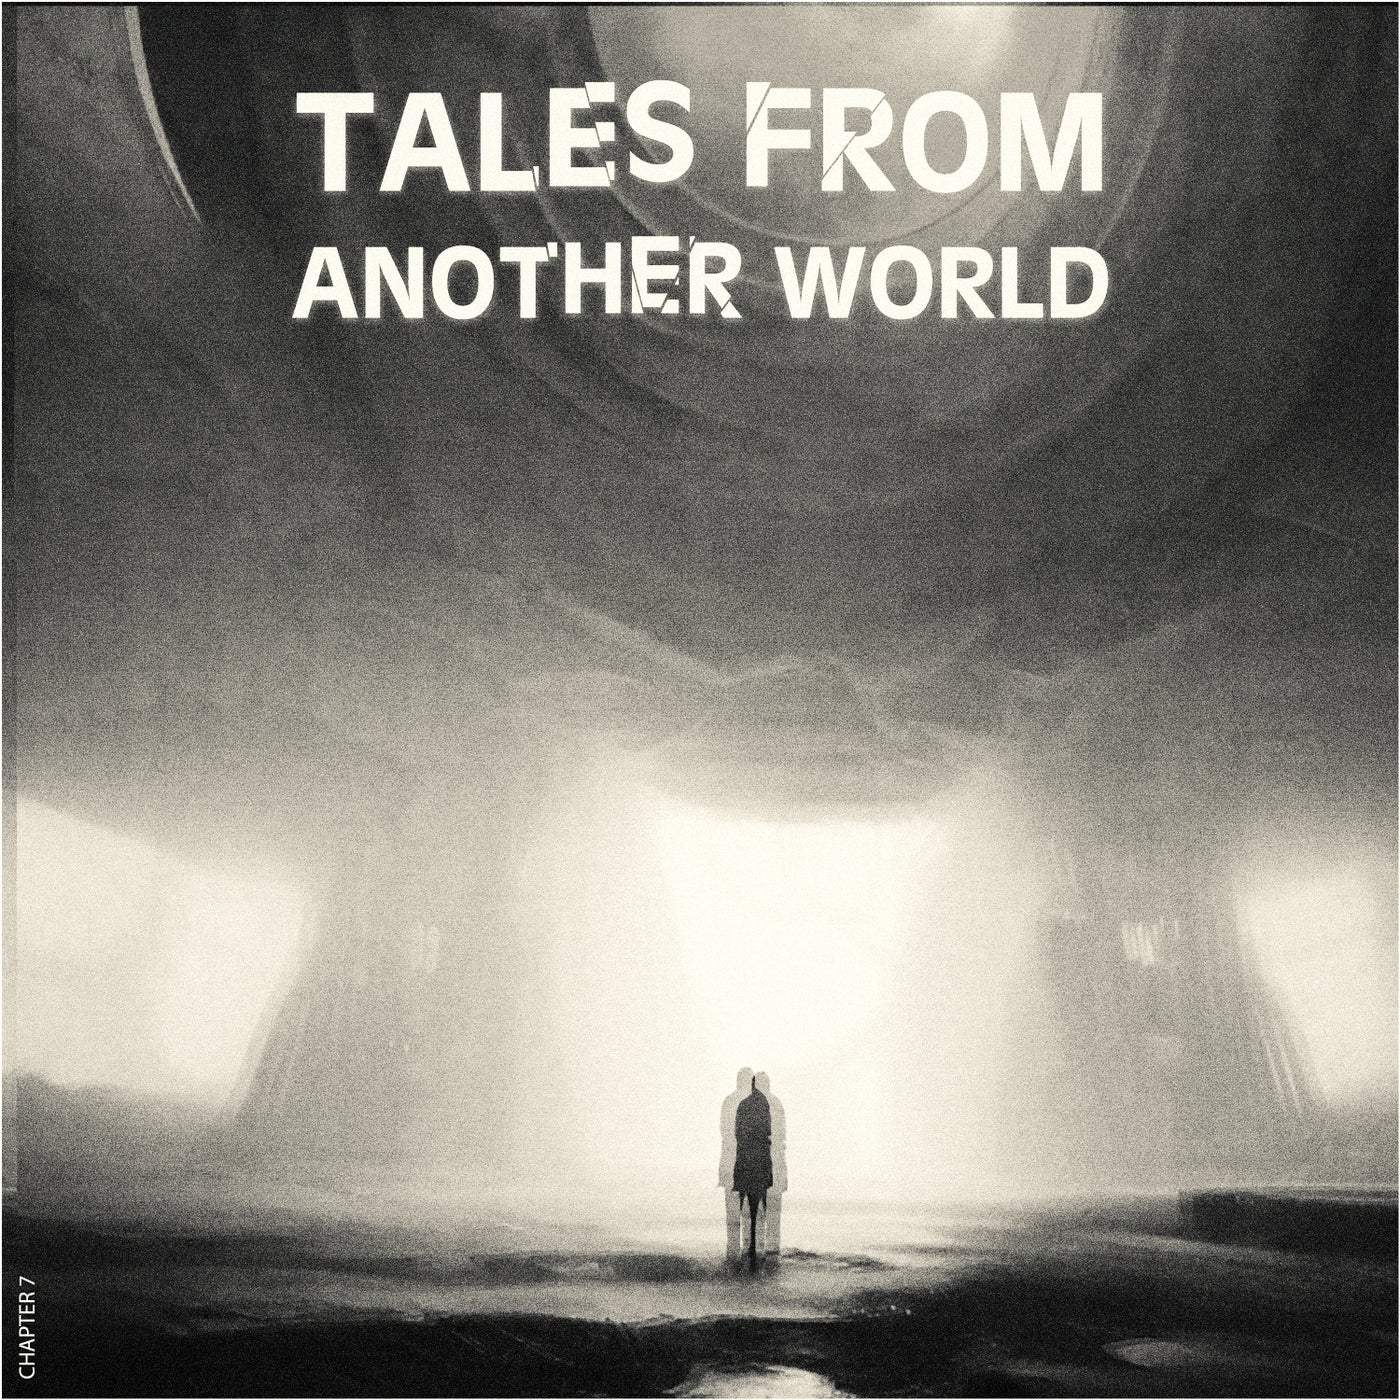 Tales from Another World